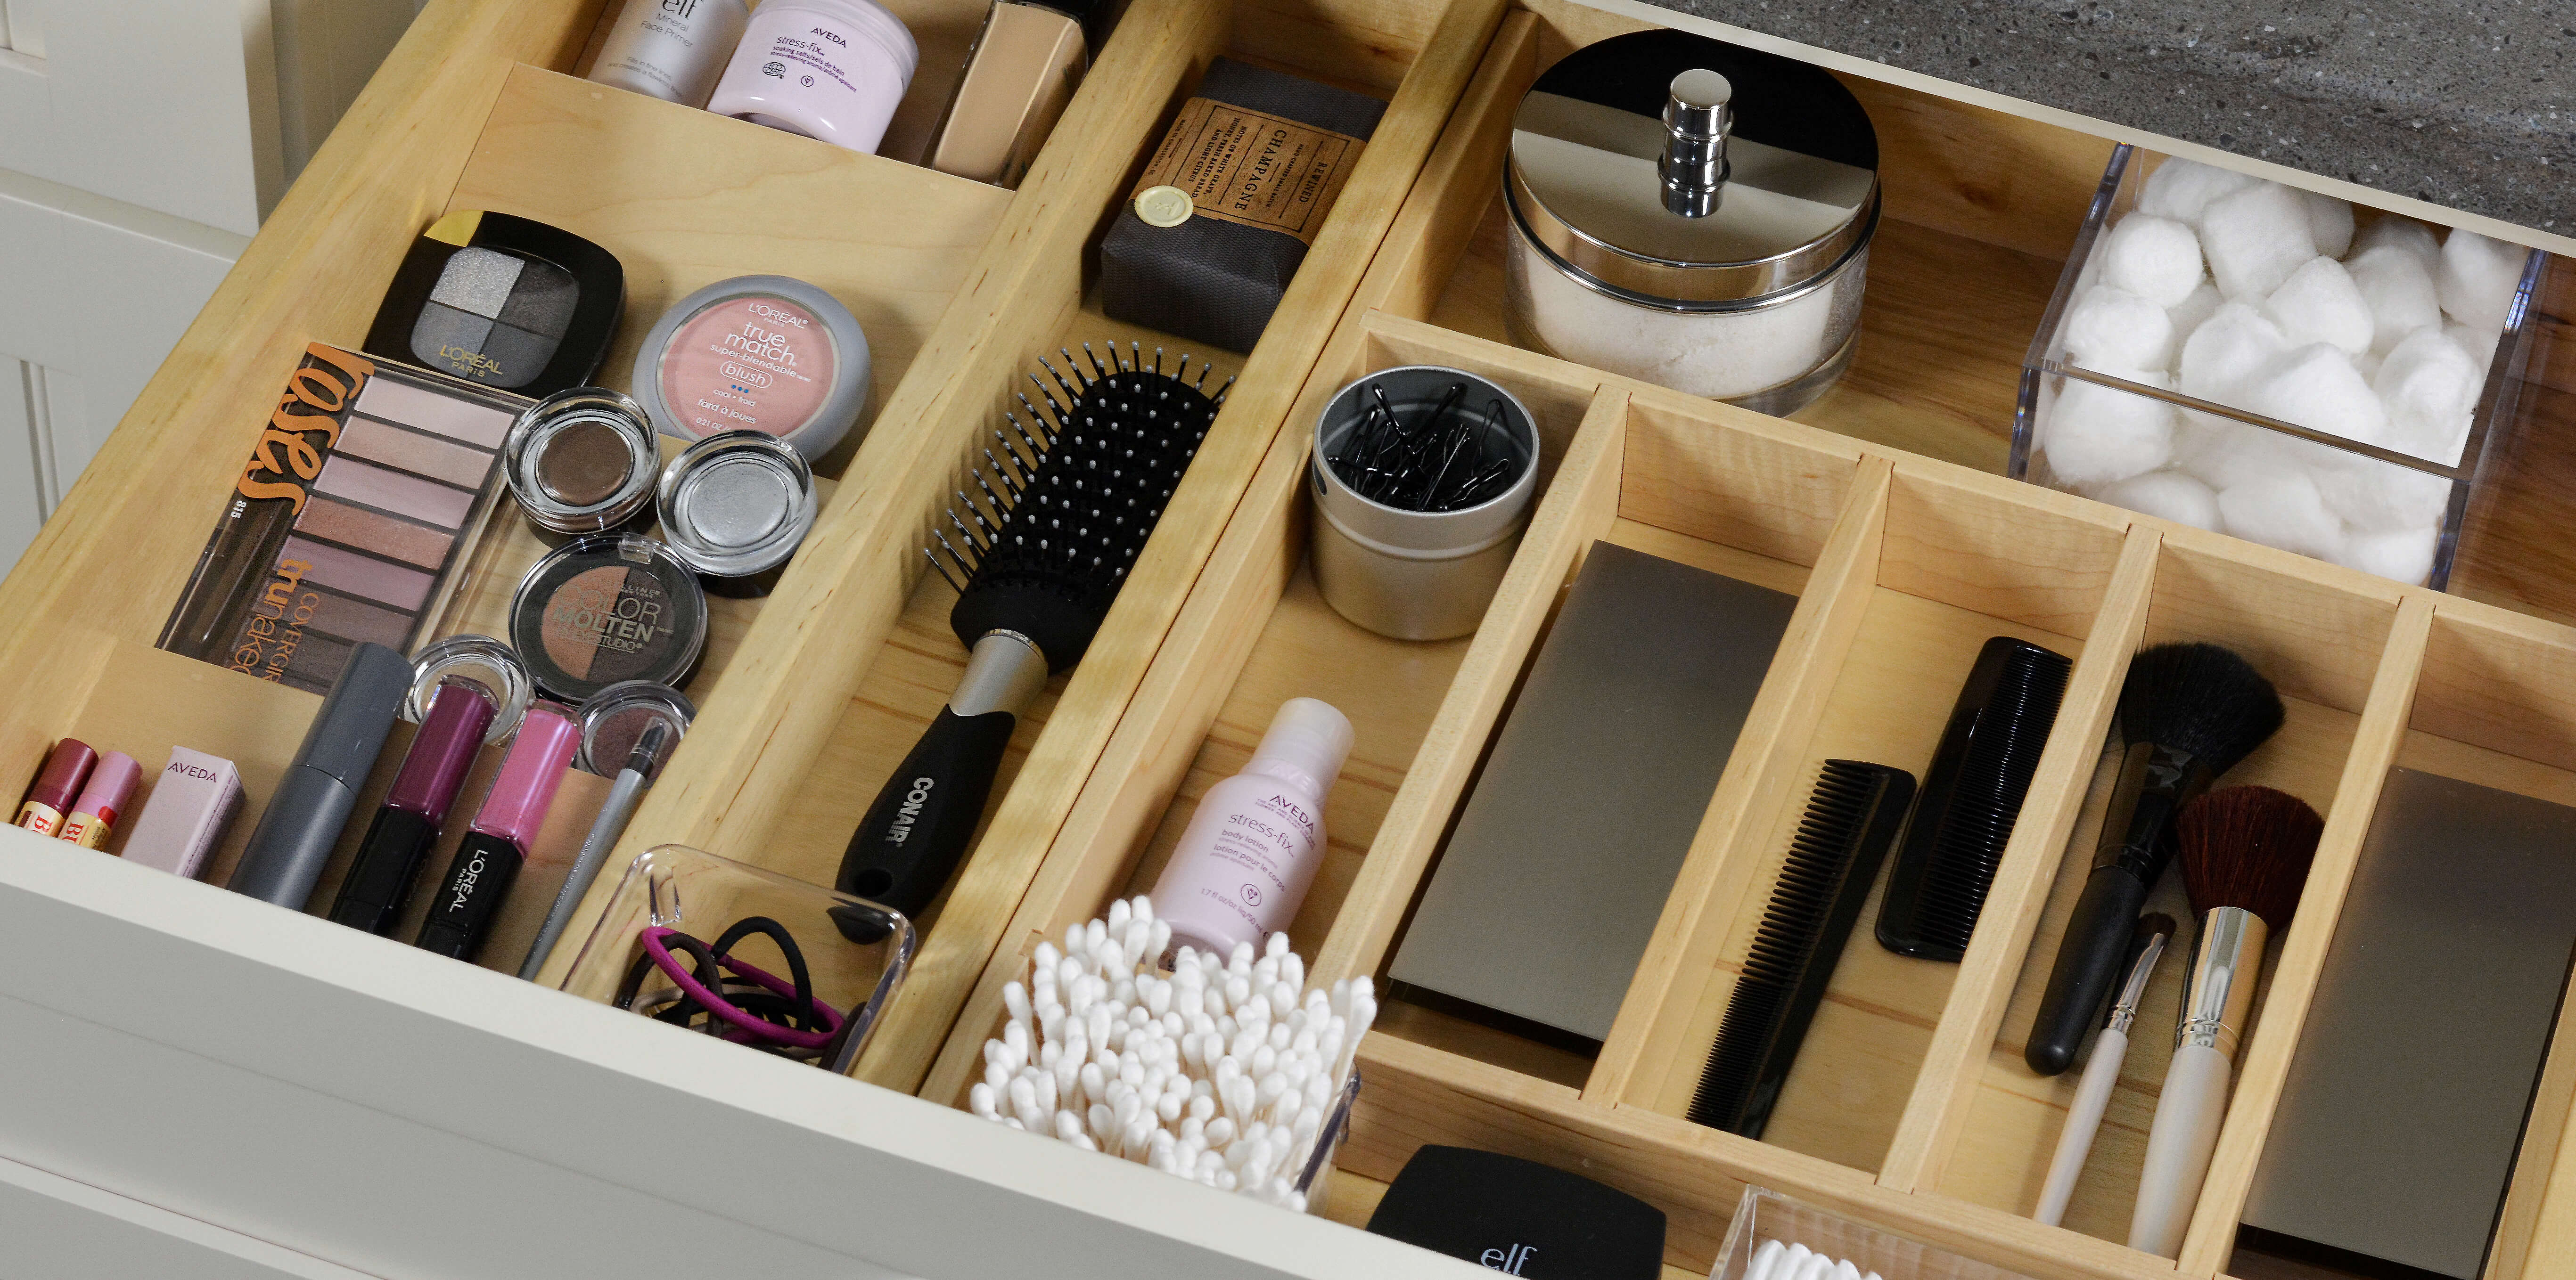 A neatly organized bathroom drawer using a drawer rack, a cutlery divider, and partitions to organize and store bathroom supplies and cosmetics.